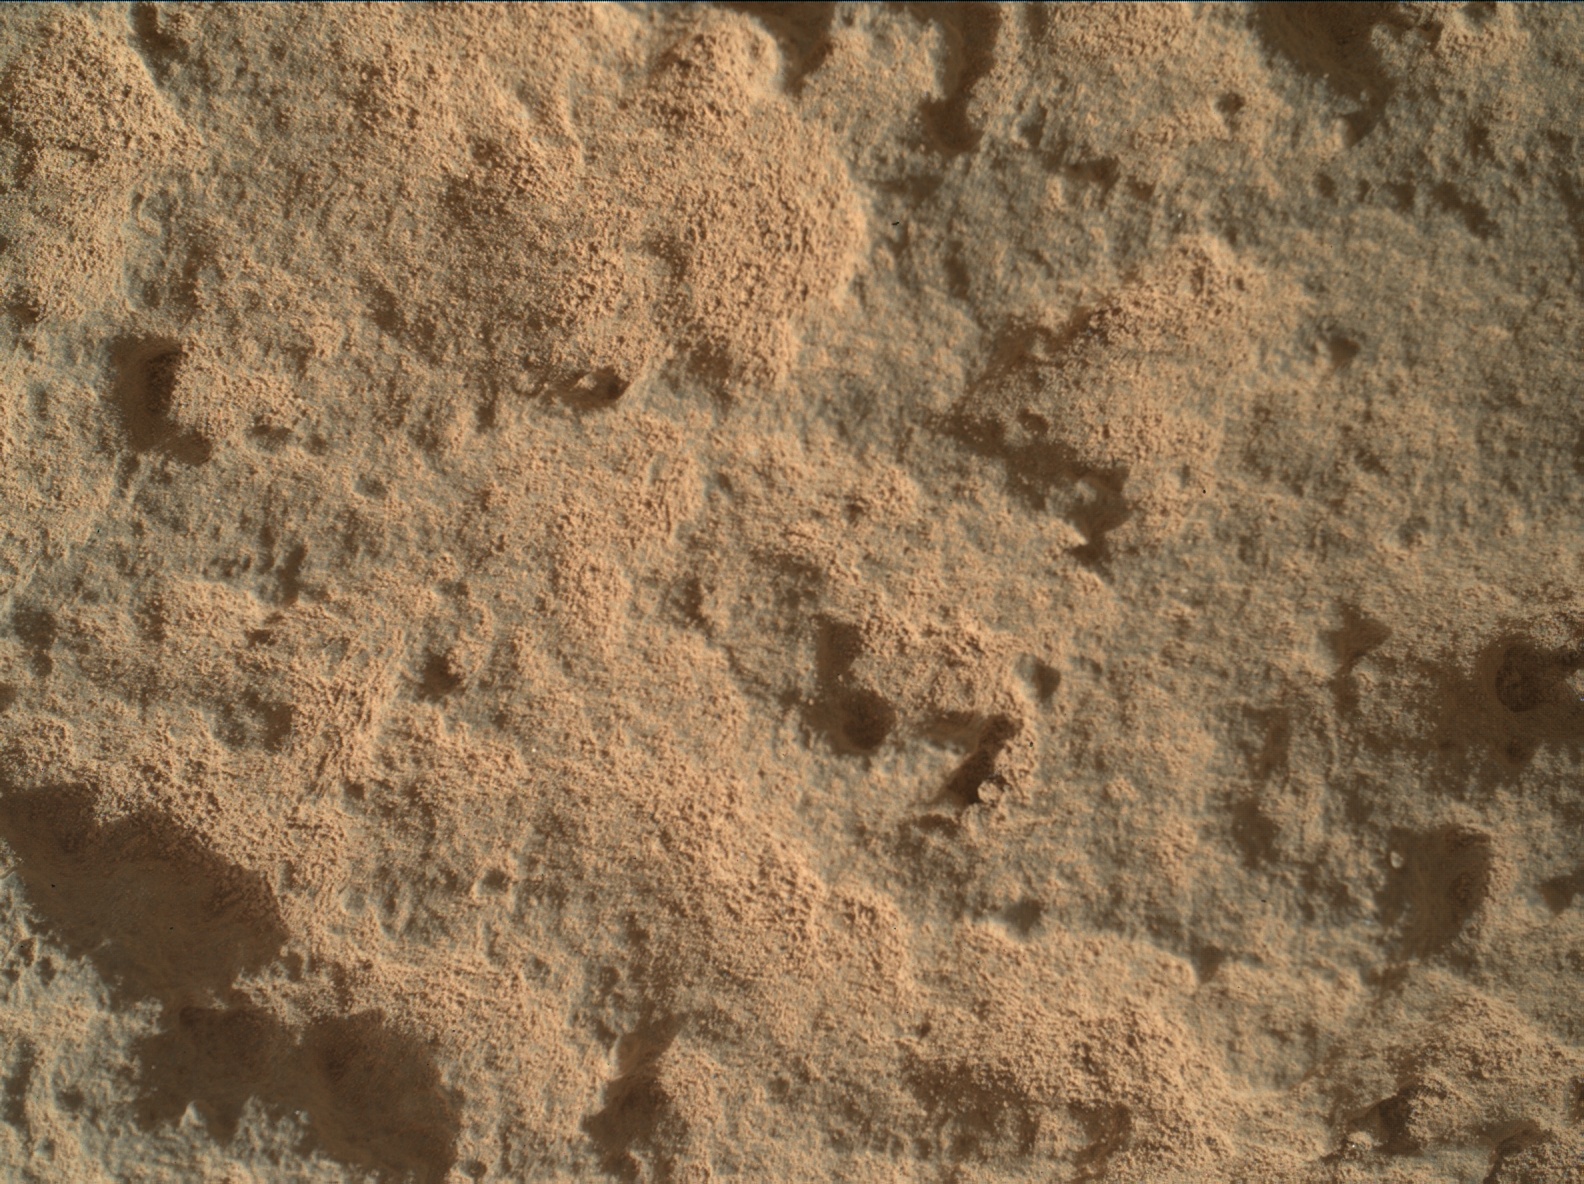 Nasa's Mars rover Curiosity acquired this image using its Mars Hand Lens Imager (MAHLI) on Sol 323